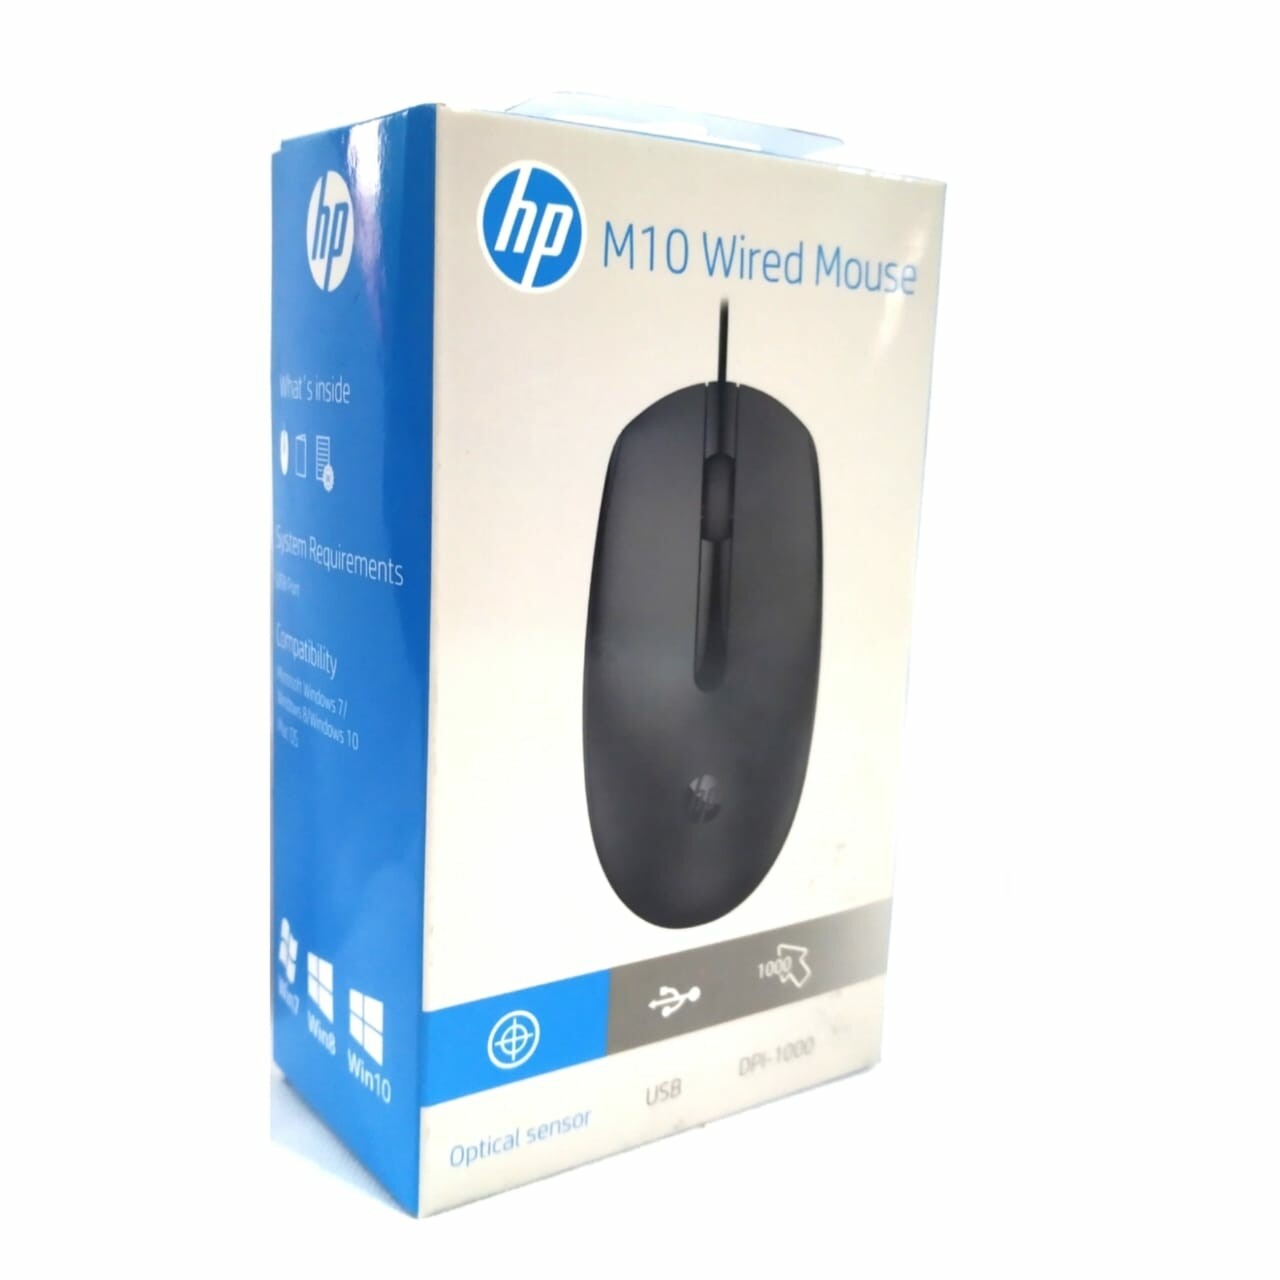 Hp M10 Wired Mouse 1000 DPI